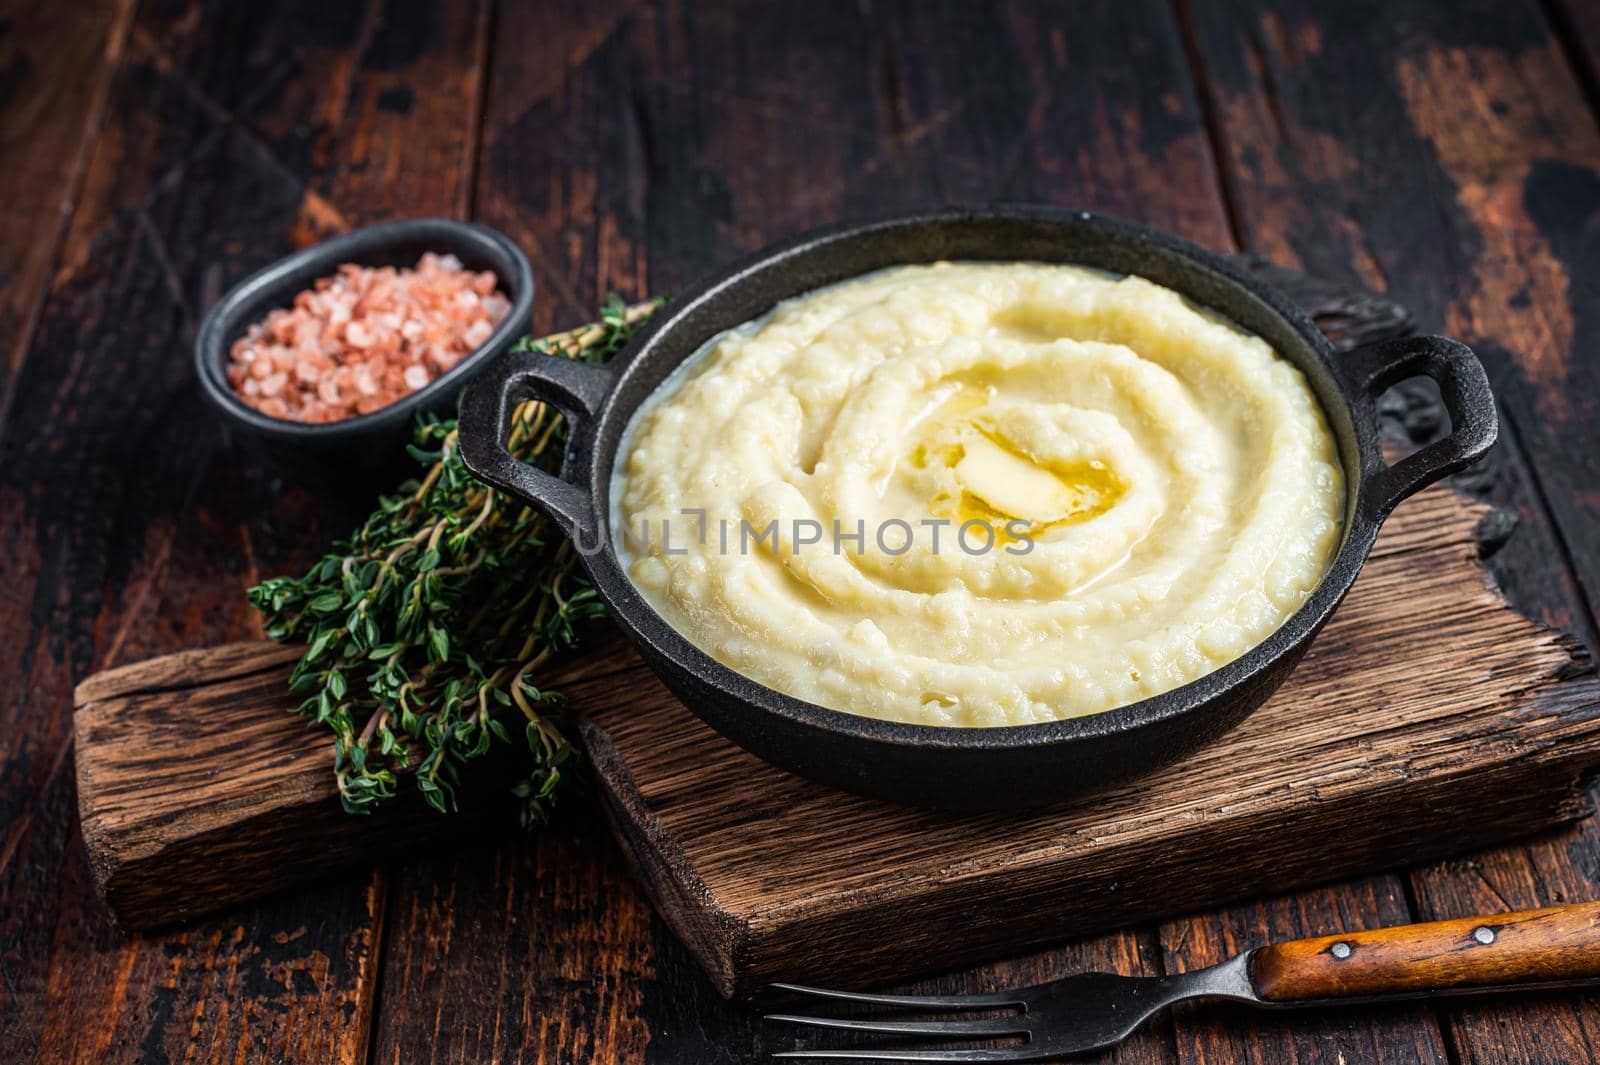 Mashed potatoes in a pan on wooden rustic table. Wooden background. Top view.